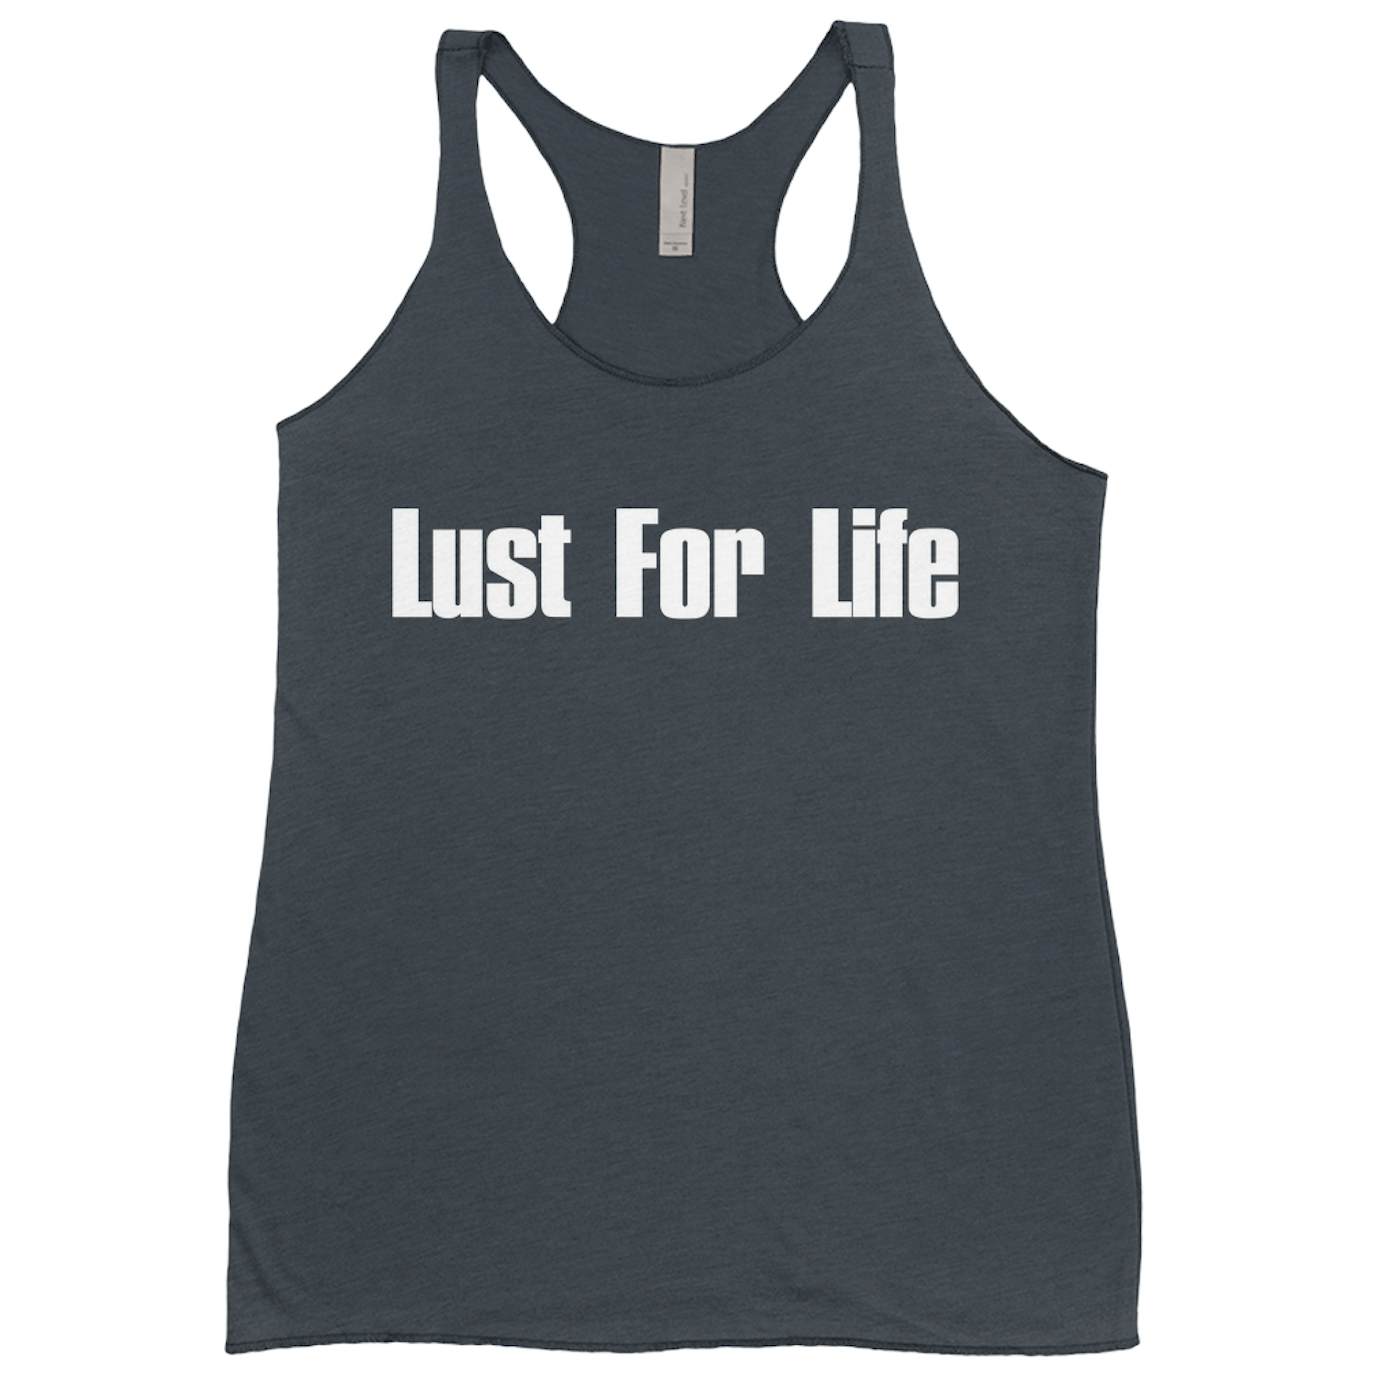 The Stooges Ladies' Tank Top | Lust For Life Worn By Iggy Pop The Stooges Shirt